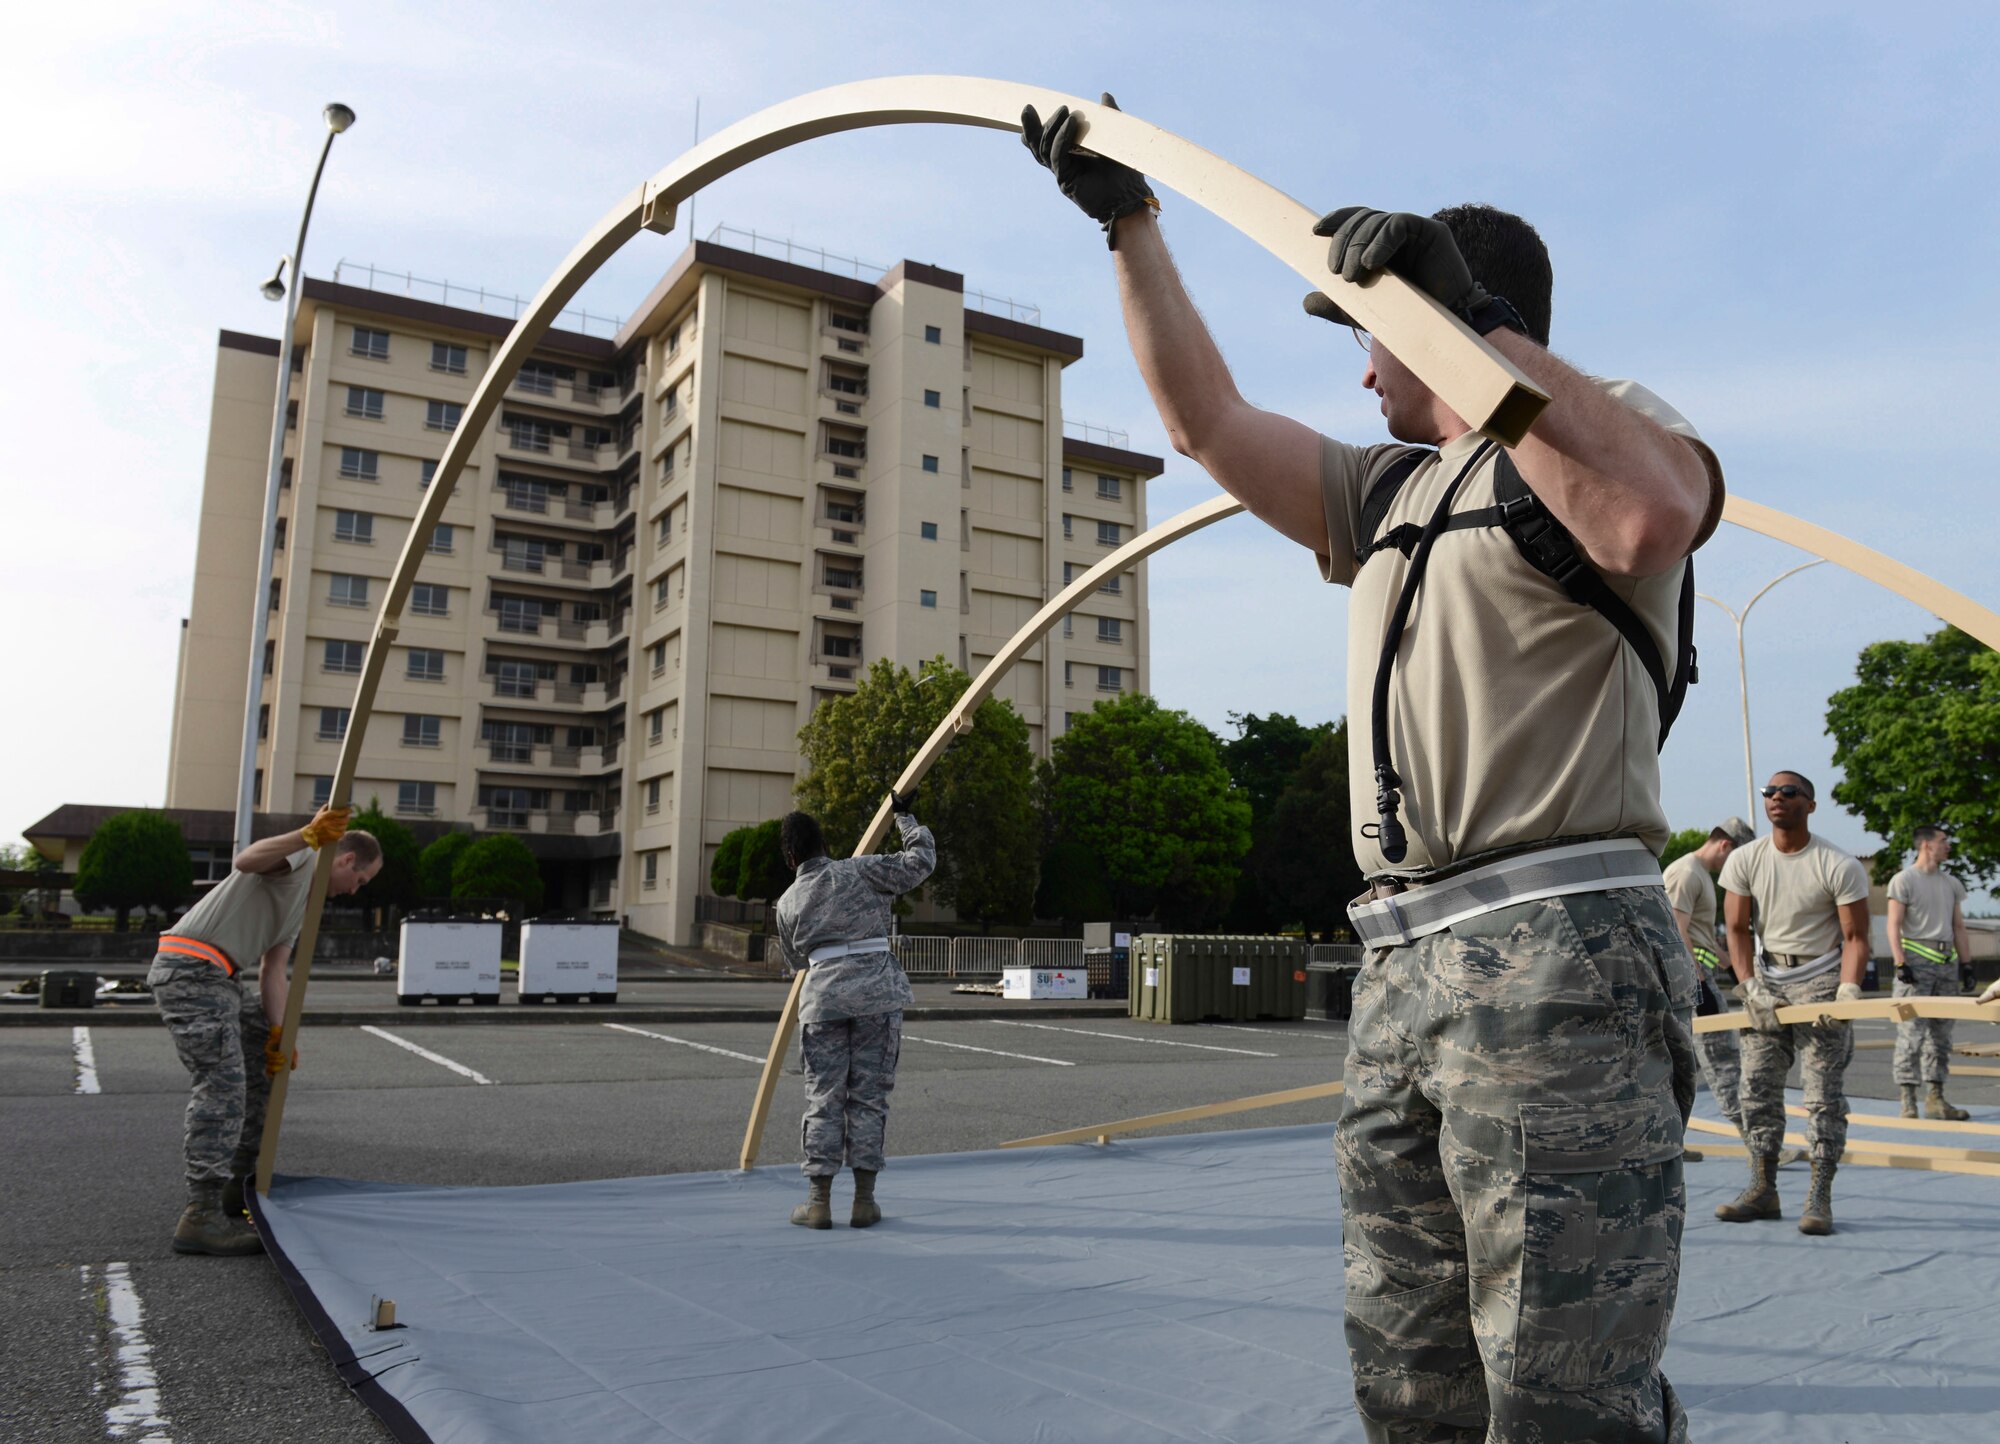 Metal beams are grounded to make an Expeditionary Medical Support tent at Yokota Air Base, Japan, May 14, 2014.  Airmen from the 374th Medical Group tested their abilities to set-up a EMEDS tent during a Samurai Readiness Inspection. (U.S. Air Force photo by Airman 1st Class Meagan Schutter/Released)